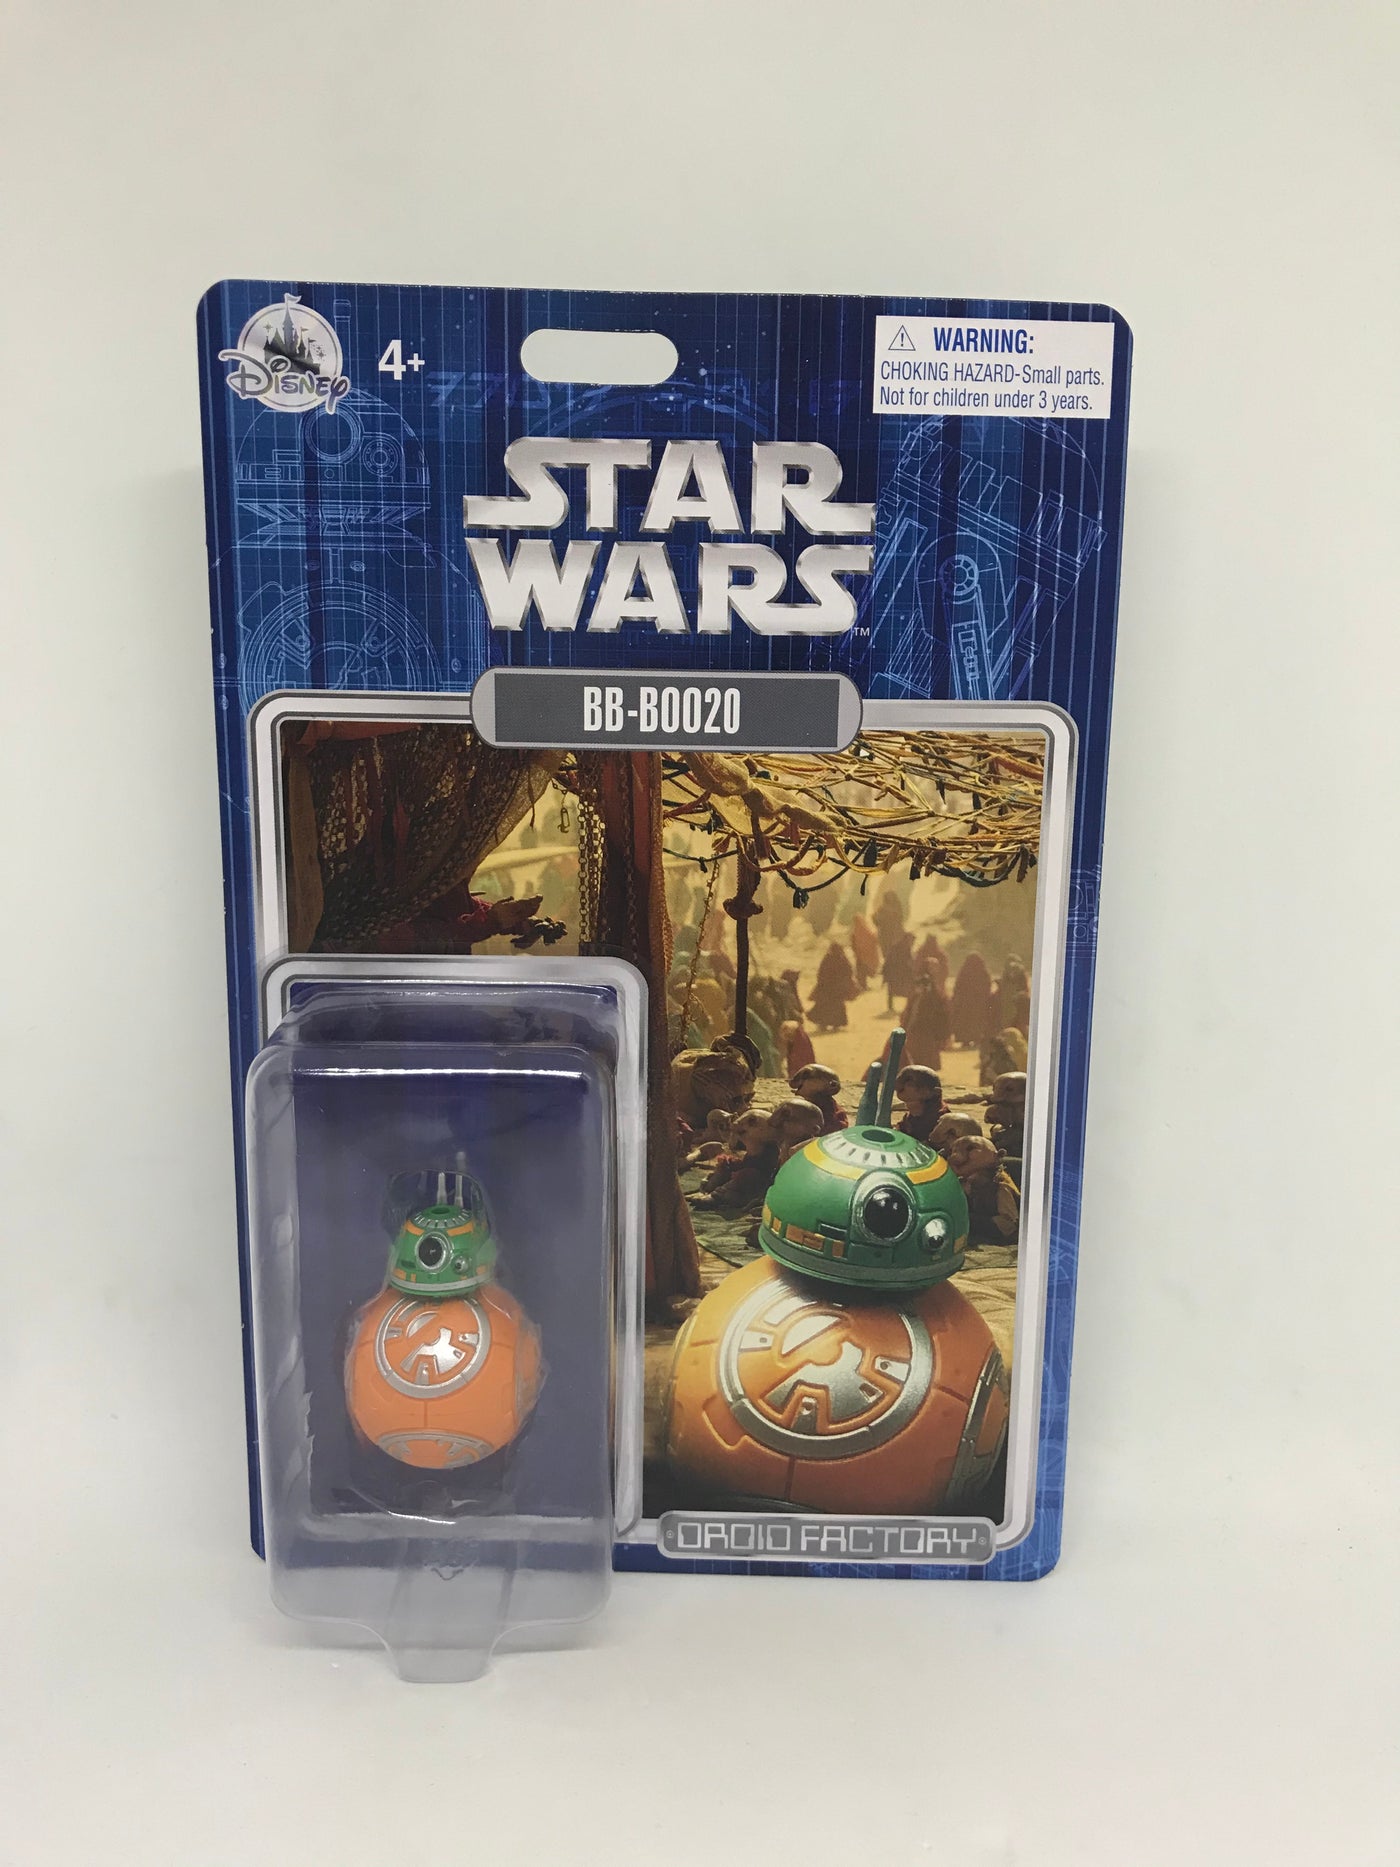 Disney Parks Star Wars BB-B0020 Halloween Holiday Droid Factory New with Box